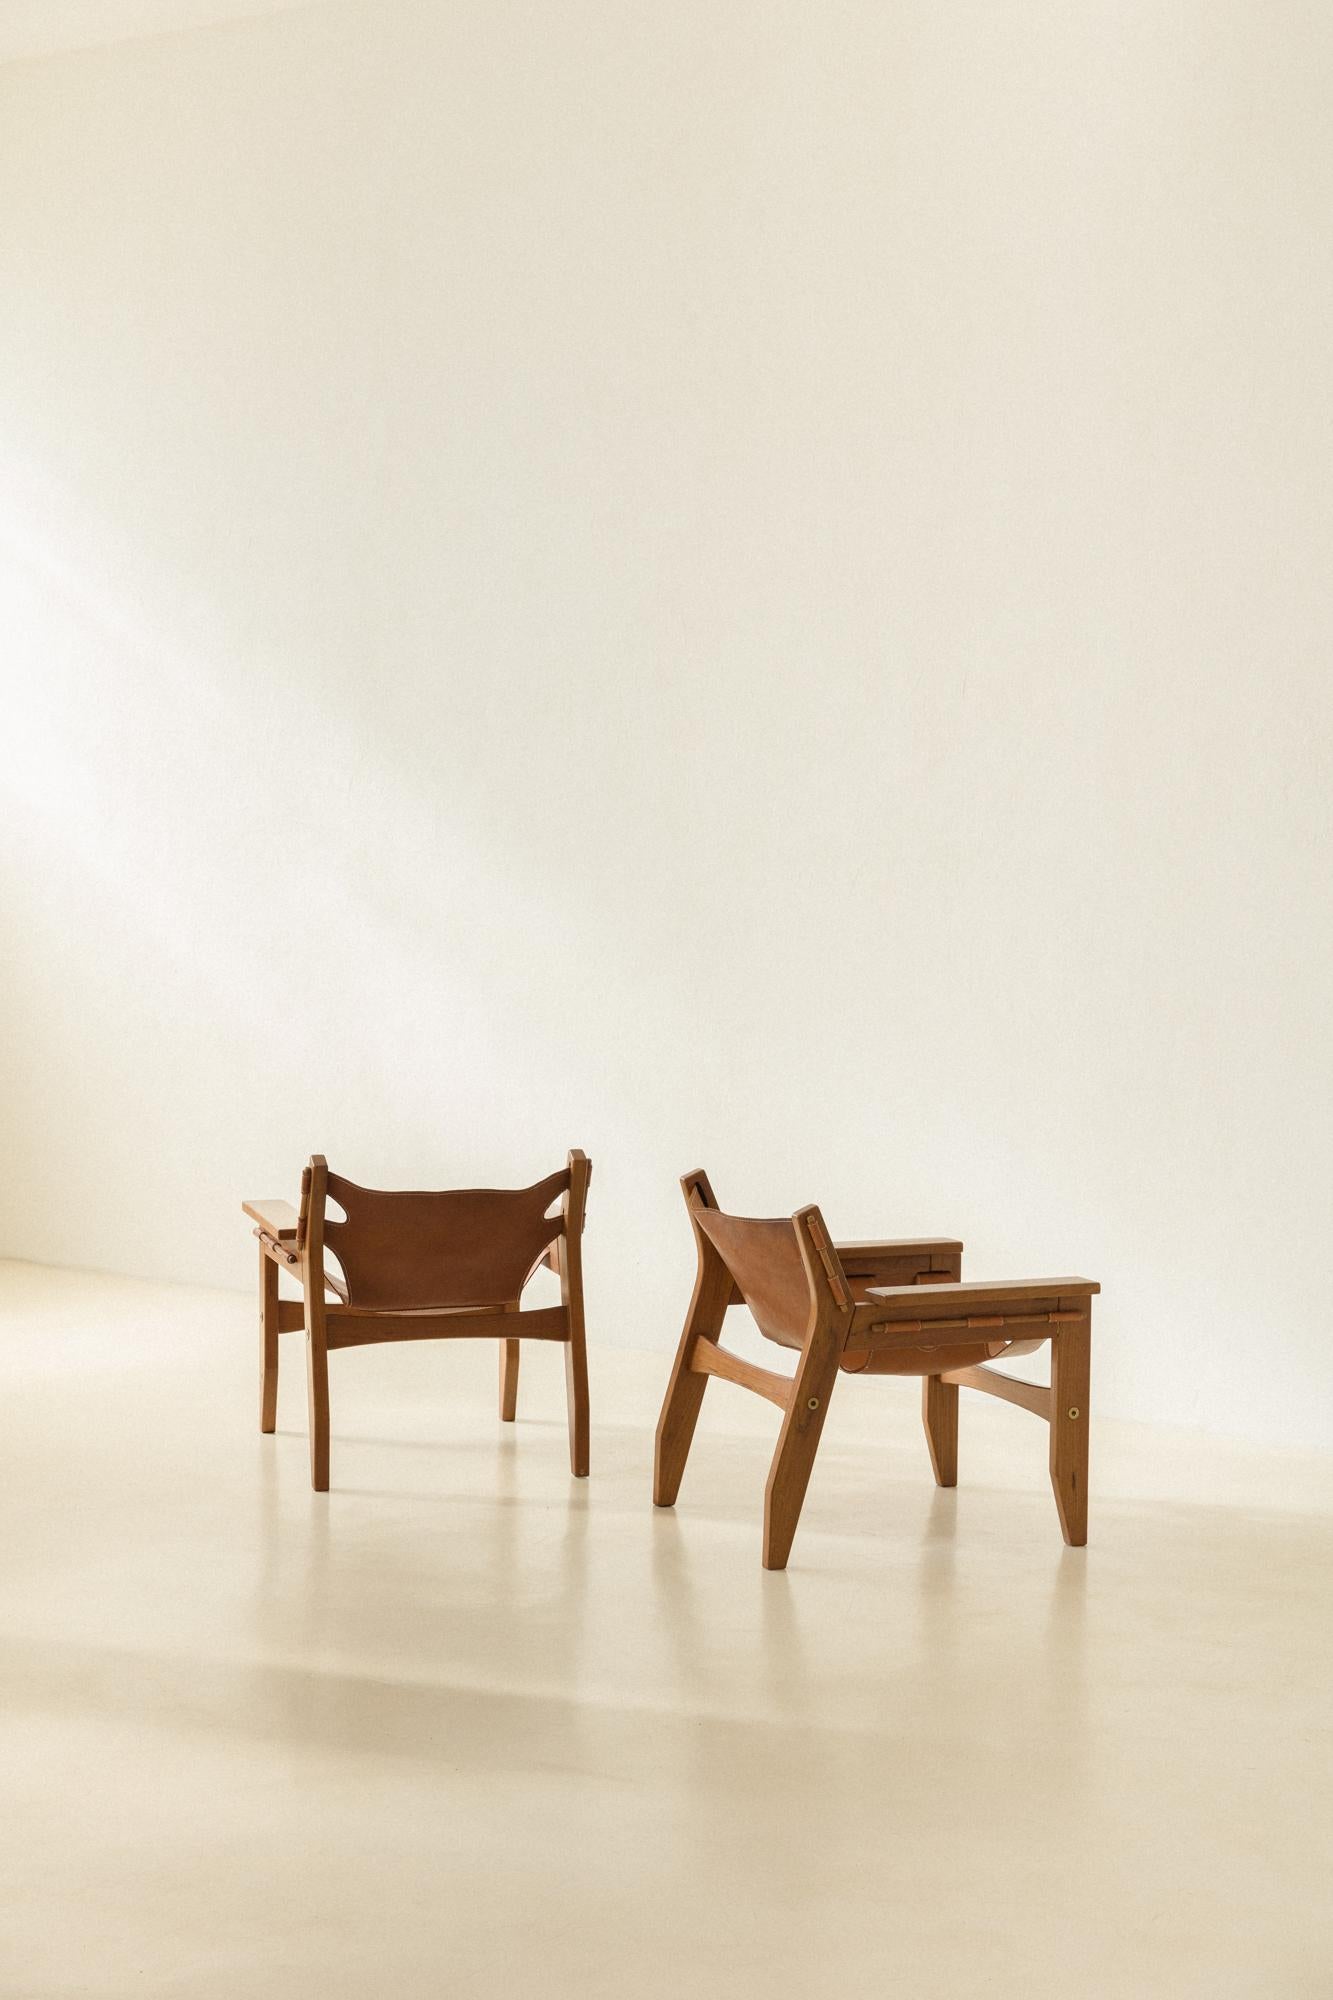 Designed by Sergio Rodrigues (1927-2014) in 1973 and produced by Oca, the Kilin armchair is composed of two sides and two crosspieces, with the back and seat made from a unique piece of leather.

The bold design, with shapes and fittings of wood